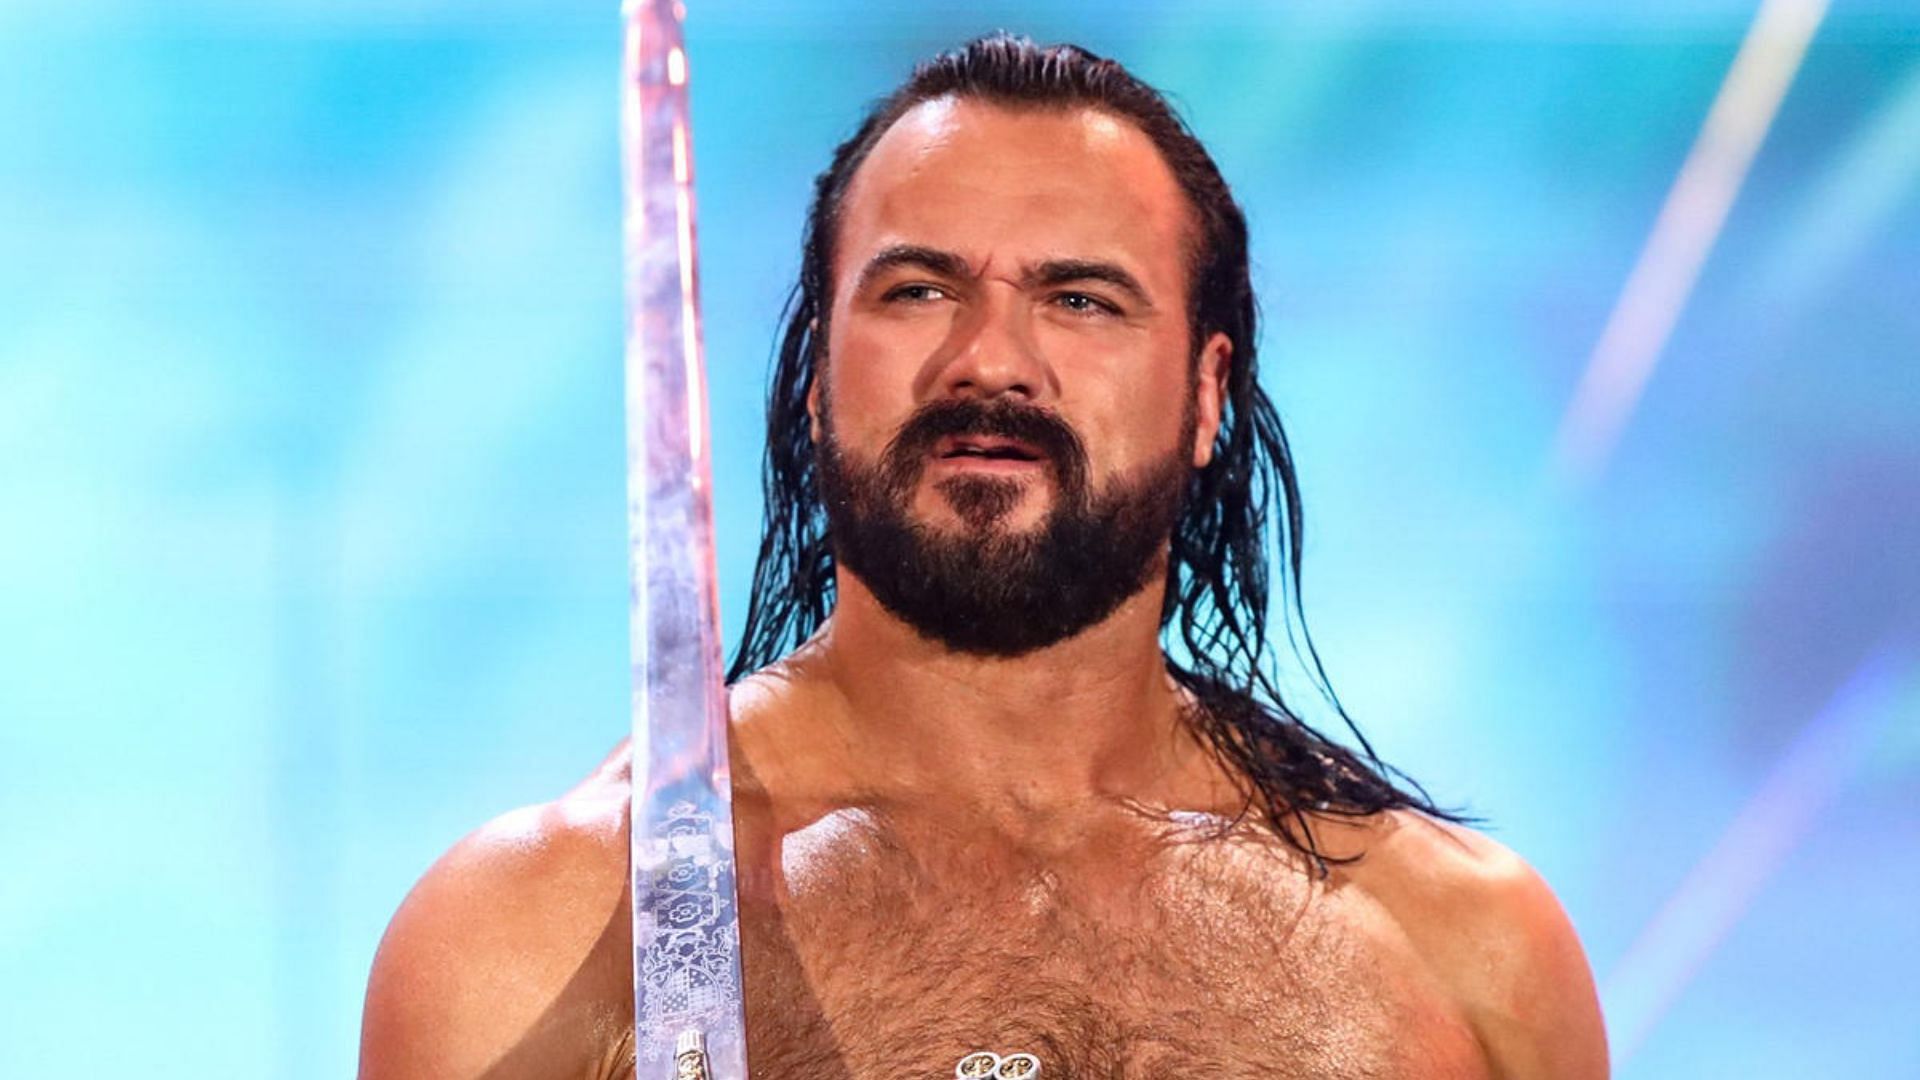 Drew McIntyre has become one of the biggest heels on RAW